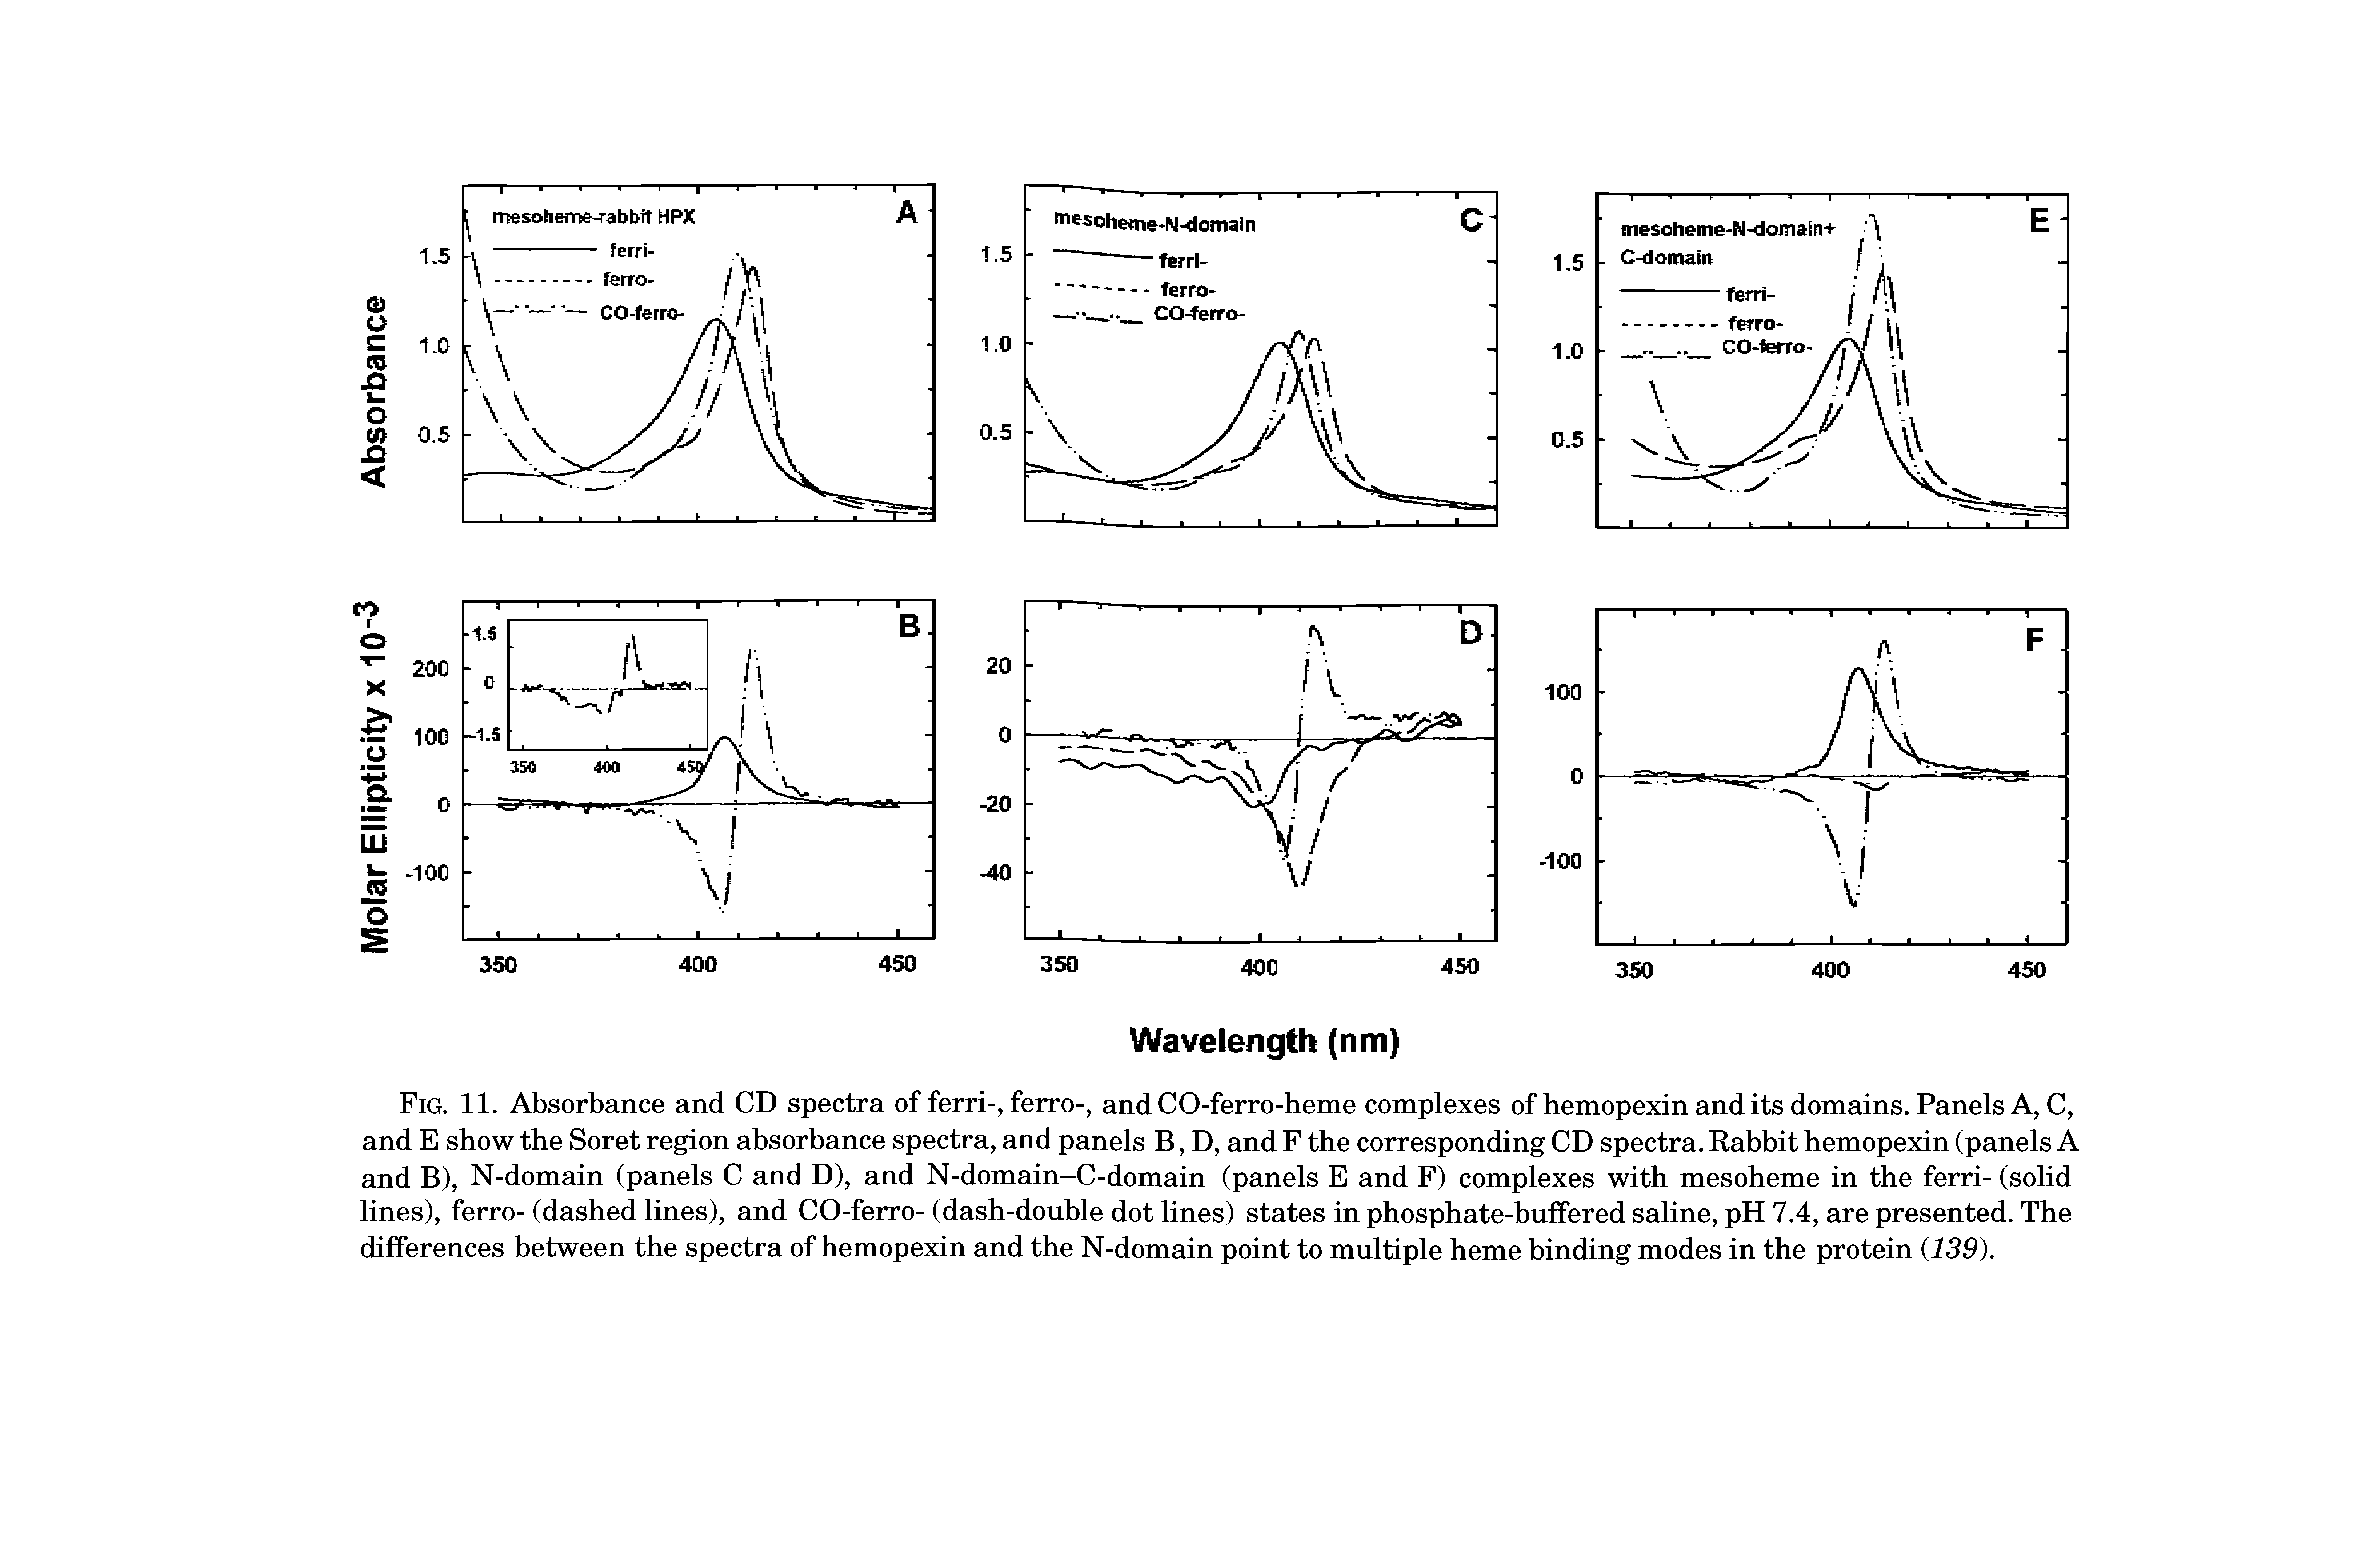 Fig. 11. Absorbance and CD spectra of ferri-, ferro-, and CO-ferro-heme complexes of hemopexin and its domains. Panels A, C, and E show the Soret region absorbance spectra, and panels B, D, and F the corresponding CD spectra. Rabbit hemopexin (panels A and B), N-domain (panels C and D), and N-domain-C-domain (panels E and F) complexes with mesoheme in the ferri- (solid lines), ferro- (dashed lines), and CO-ferro- (dash-double dot lines) states in phosphate-buffered saline, pH 7.4, are presented. The differences between the spectra of hemopexin and the N-domain point to multiple heme binding modes in the protein (139).